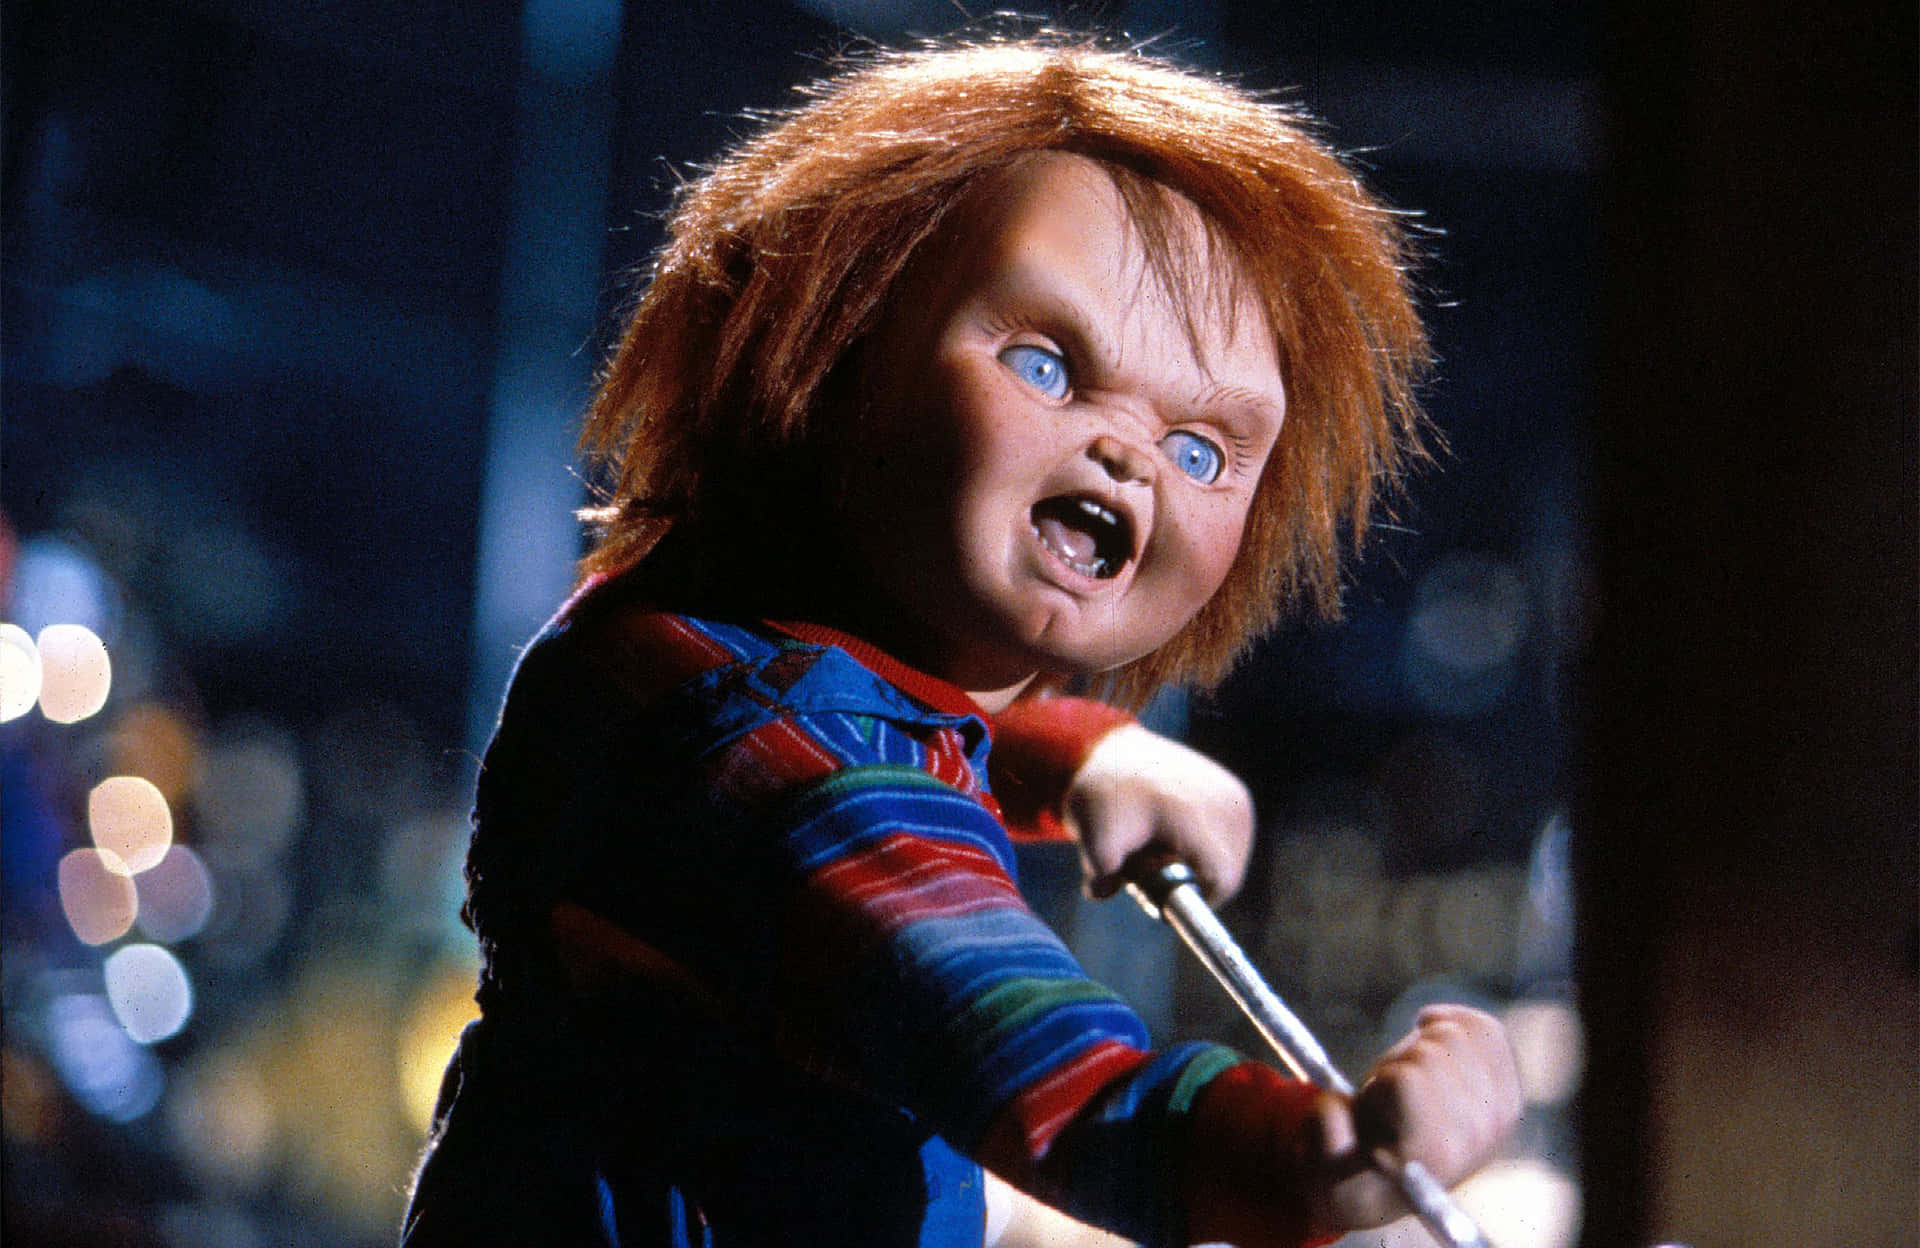 Chilling Portrait Of Chucky The Doll